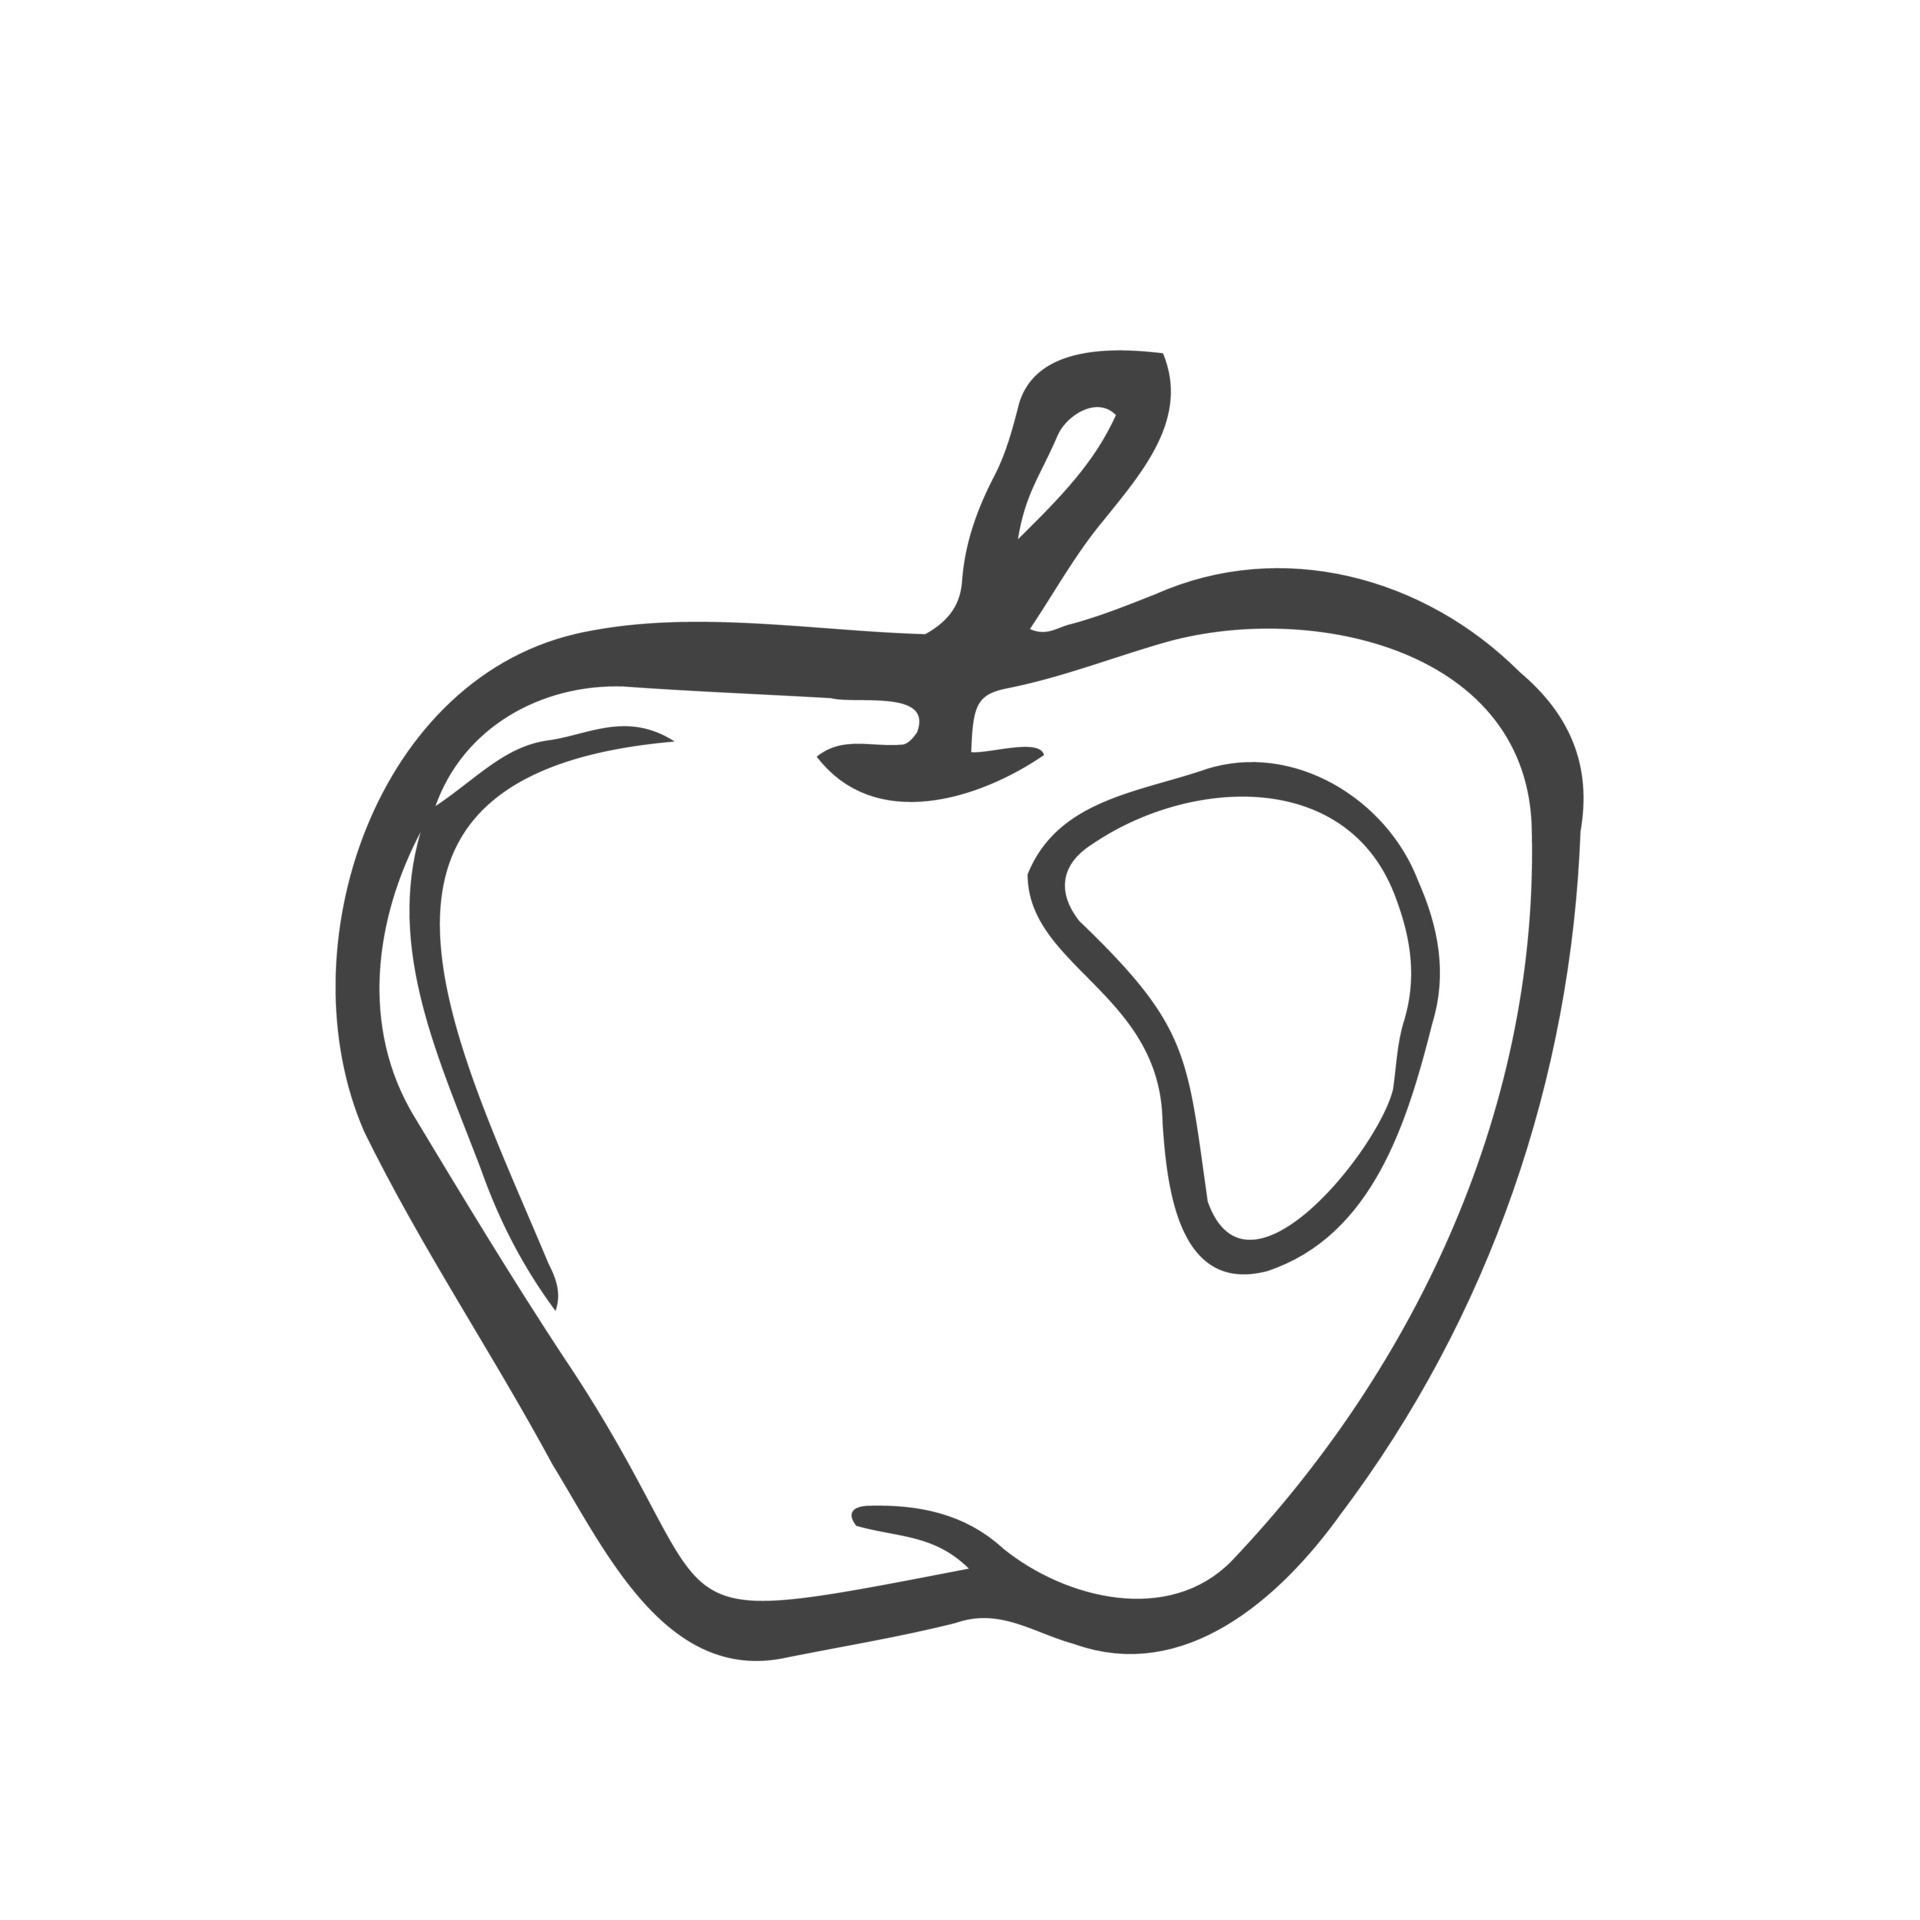 https://static.vecteezy.com/system/resources/previews/031/720/703/original/apple-fruit-hand-drawn-outline-doodle-icon-fresh-healthy-fruit-apple-sketch-illustration-for-print-web-mobile-and-infographics-isolated-on-white-background-vector.jpg